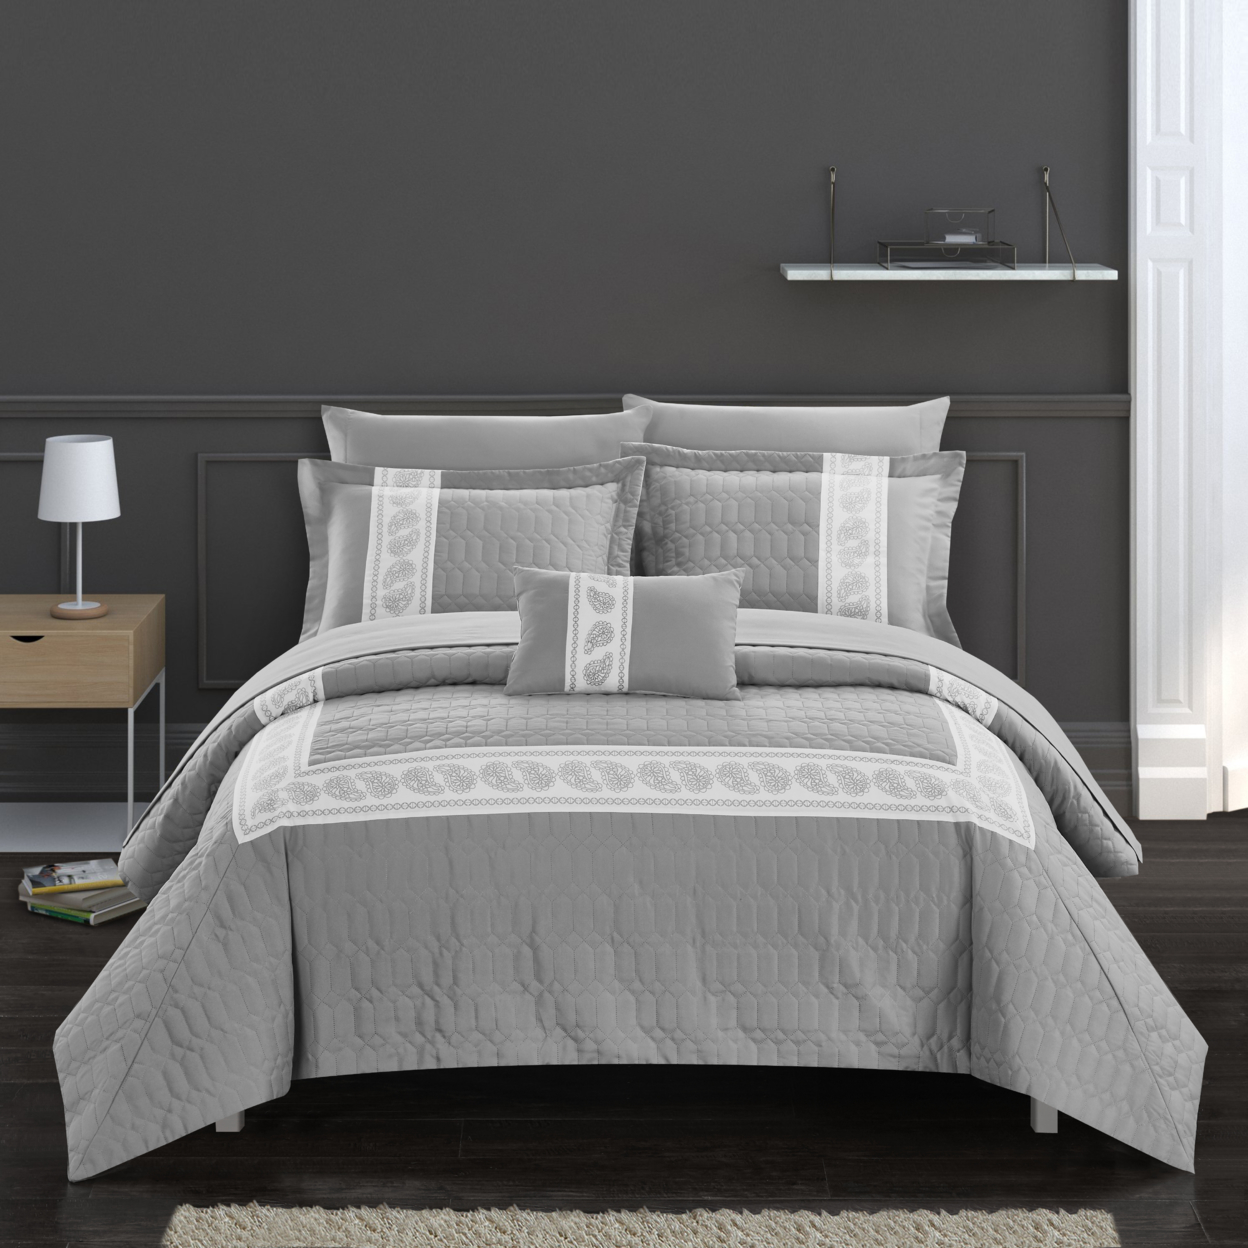 Keegan 8 Or 6 Piece Comforter Set Hotel Collection Hexagon Embossed Paisley Print Border Design Bed In A Bag - Grey, Twin